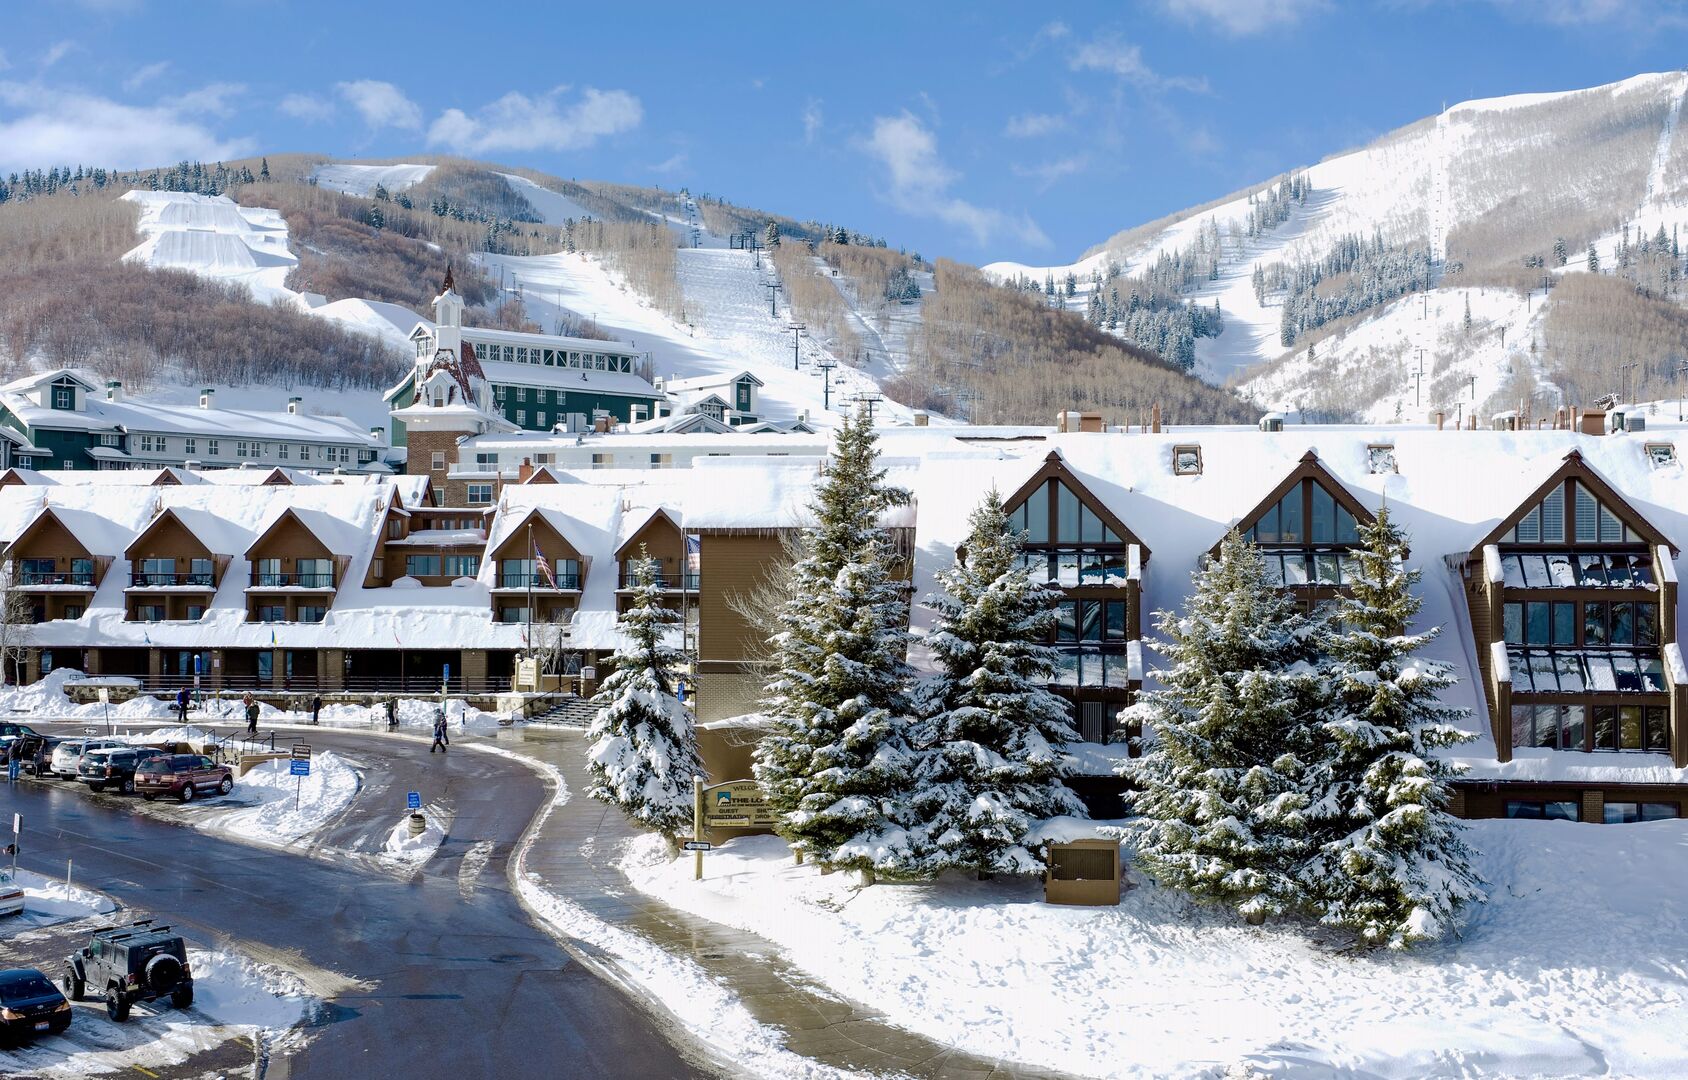 The Lodge at Mountain Village in the winter